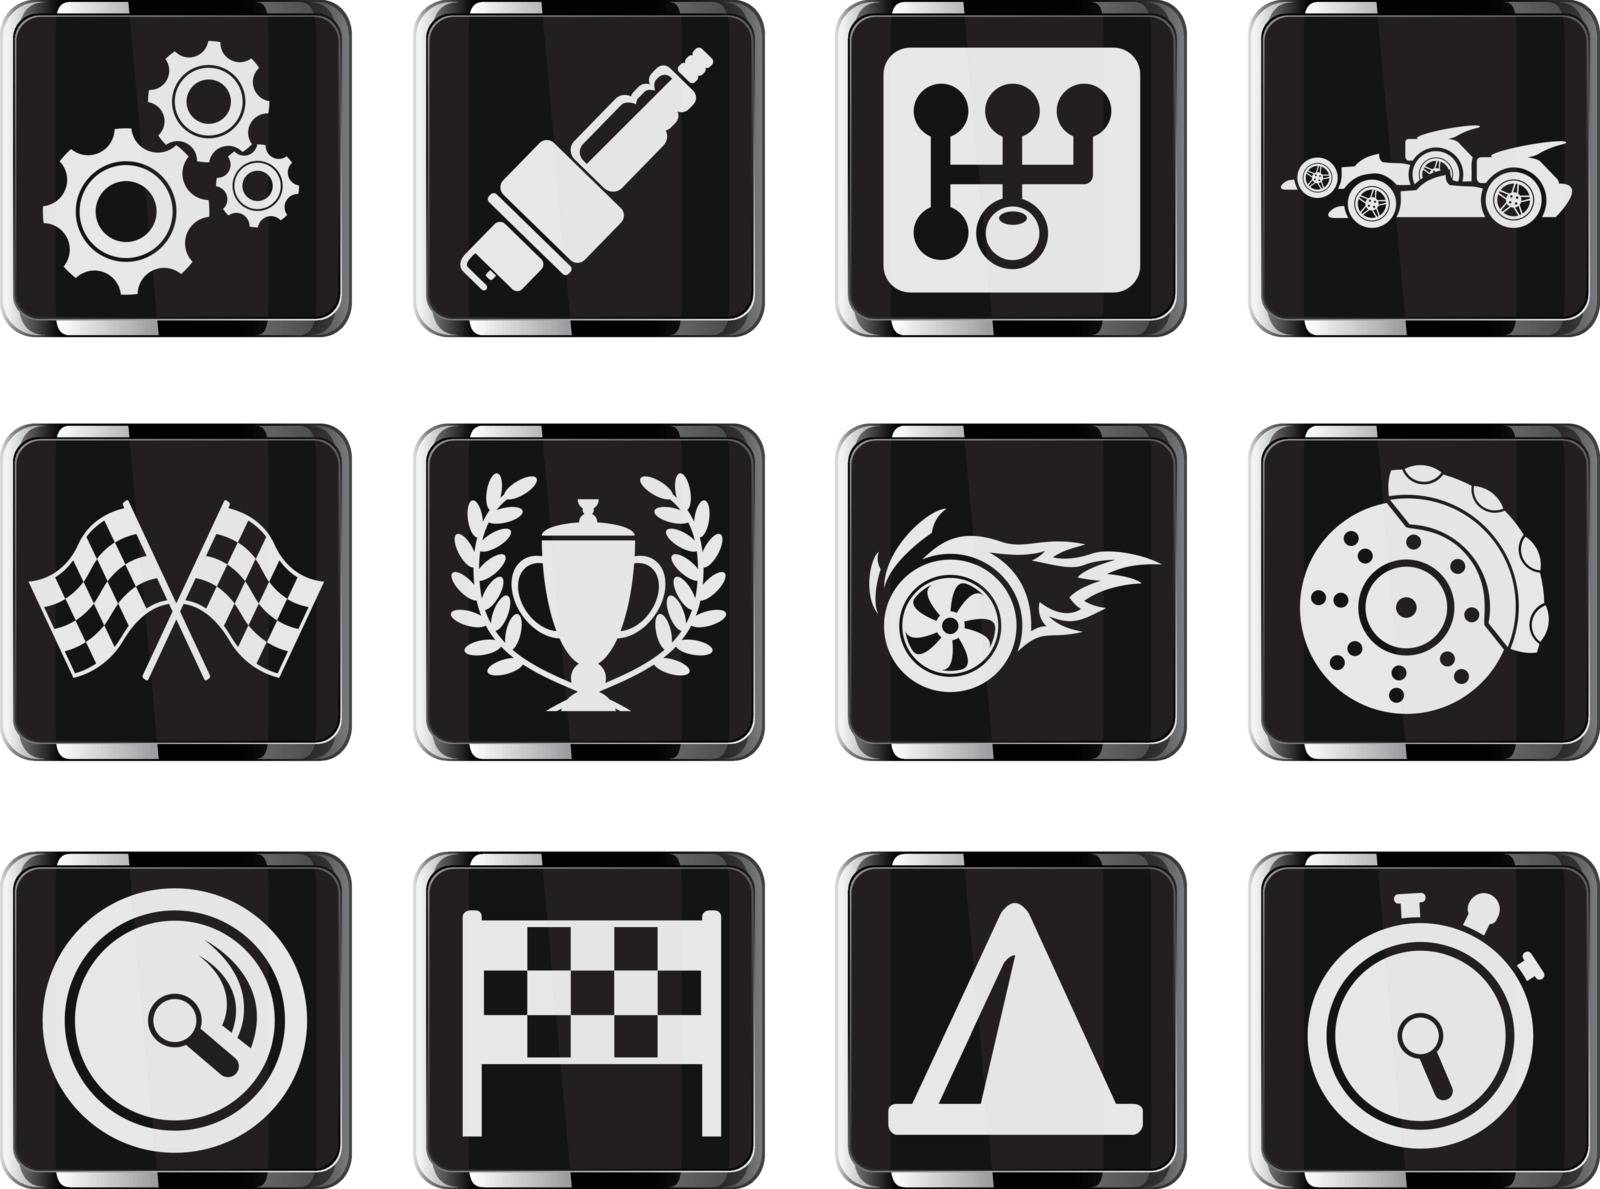 Racing icons by ayax